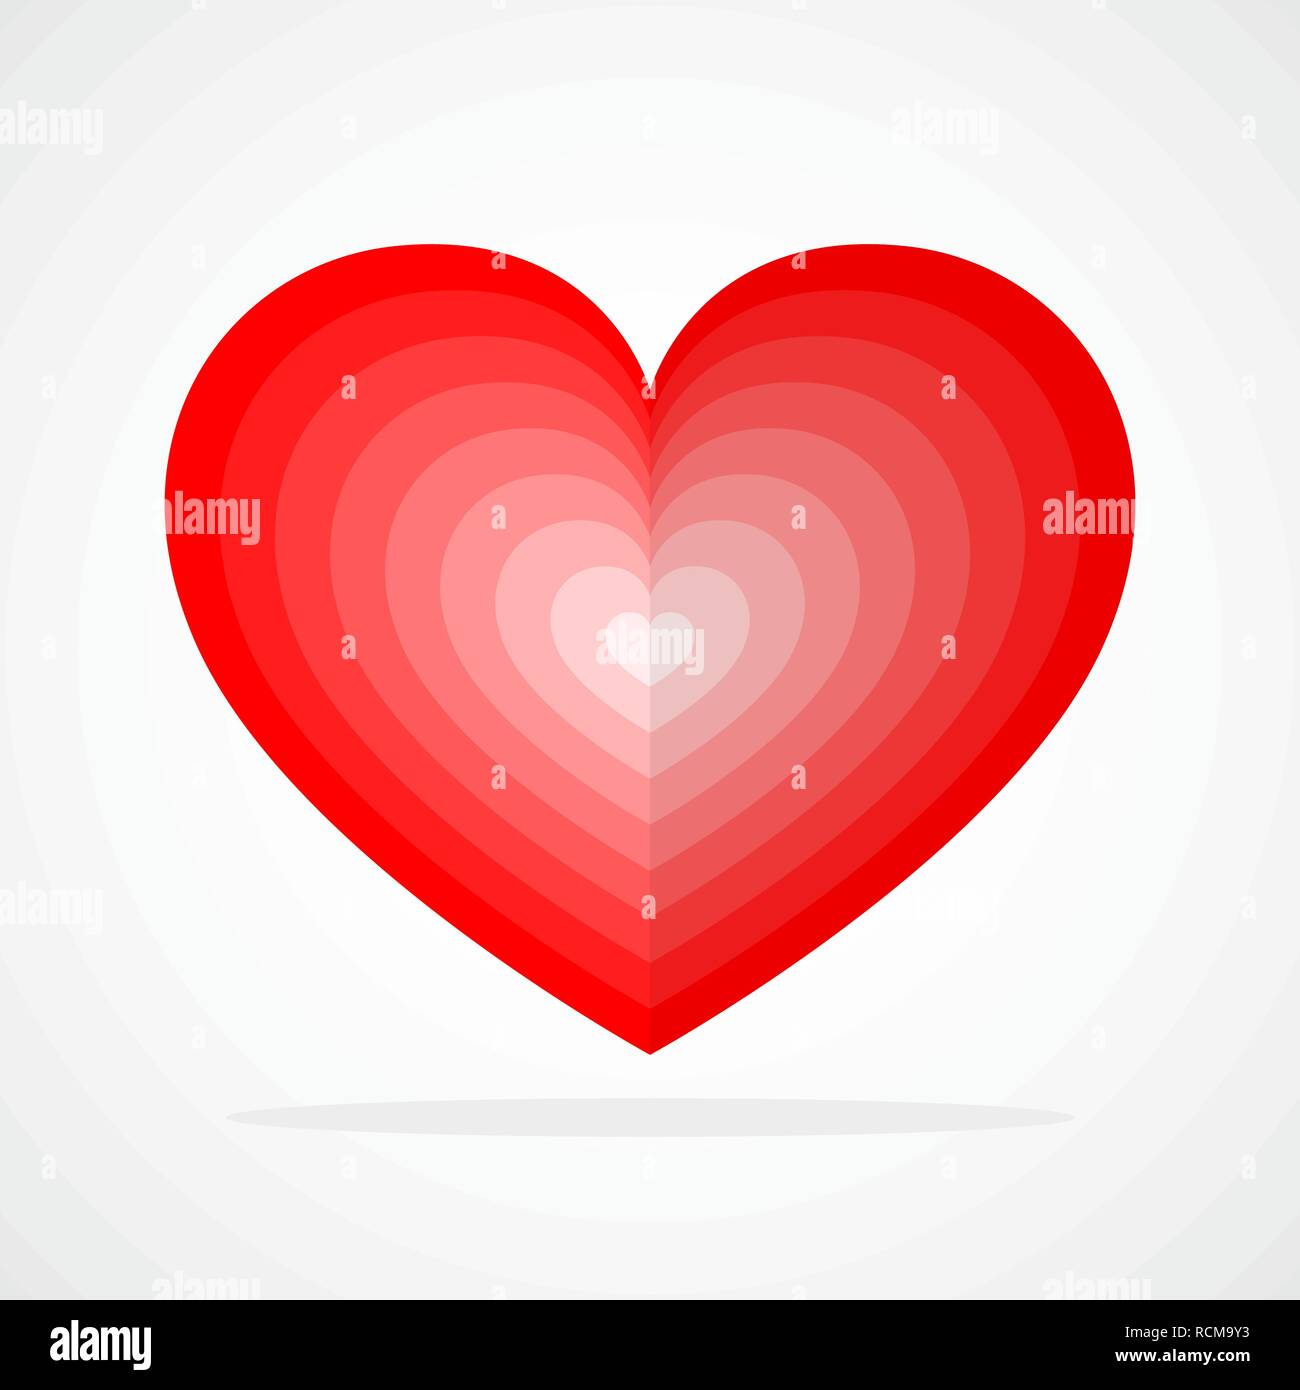 Red heart for the Valentine's day. Abstract heart on white background in flat design. Vector illustration. Stock Vector